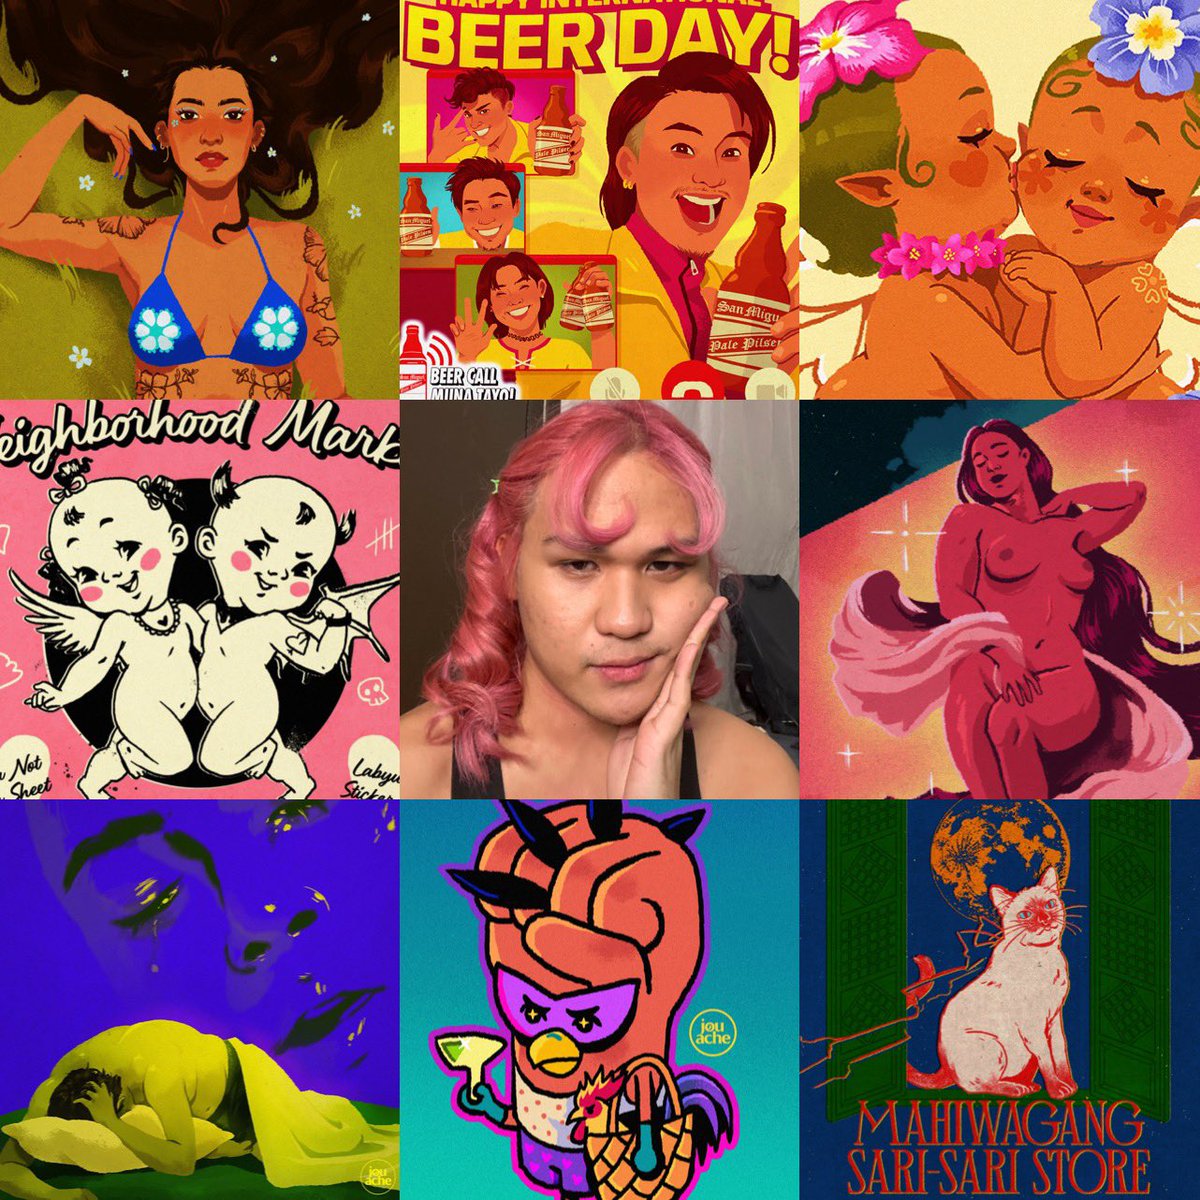 Pahabol posting #artvsartist2021

Not much personal art this year. Will try again next year 🥲. 